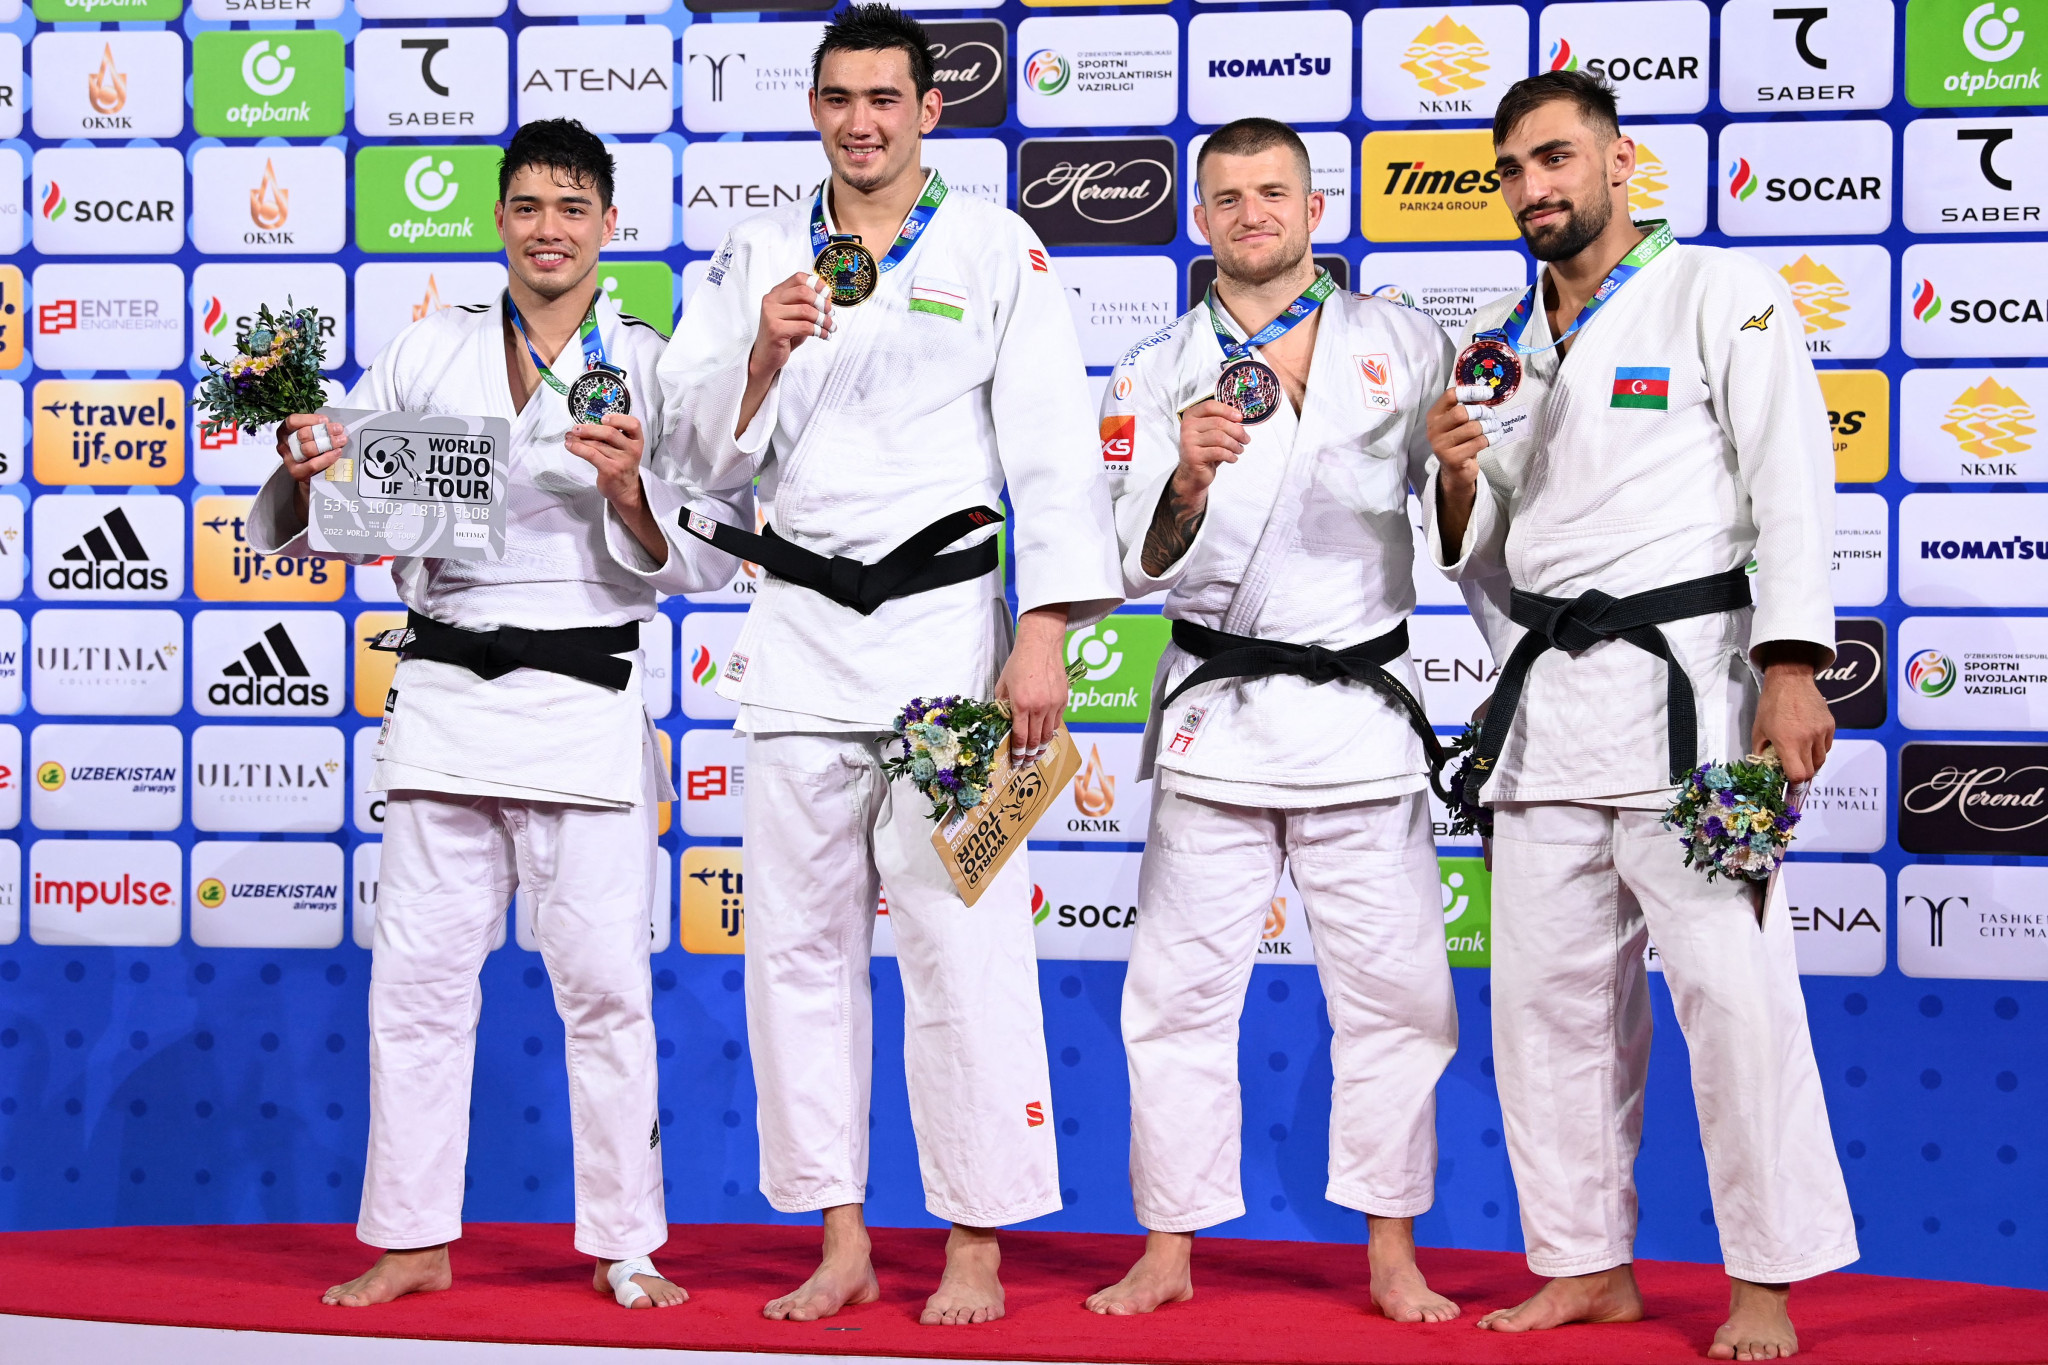 The Netherlands' Michael Korrel, second right and Azerbaijan's Zelym Kotsoiev, right, clinched the bronze medals in the men's under-100kg tournament ©Getty Images